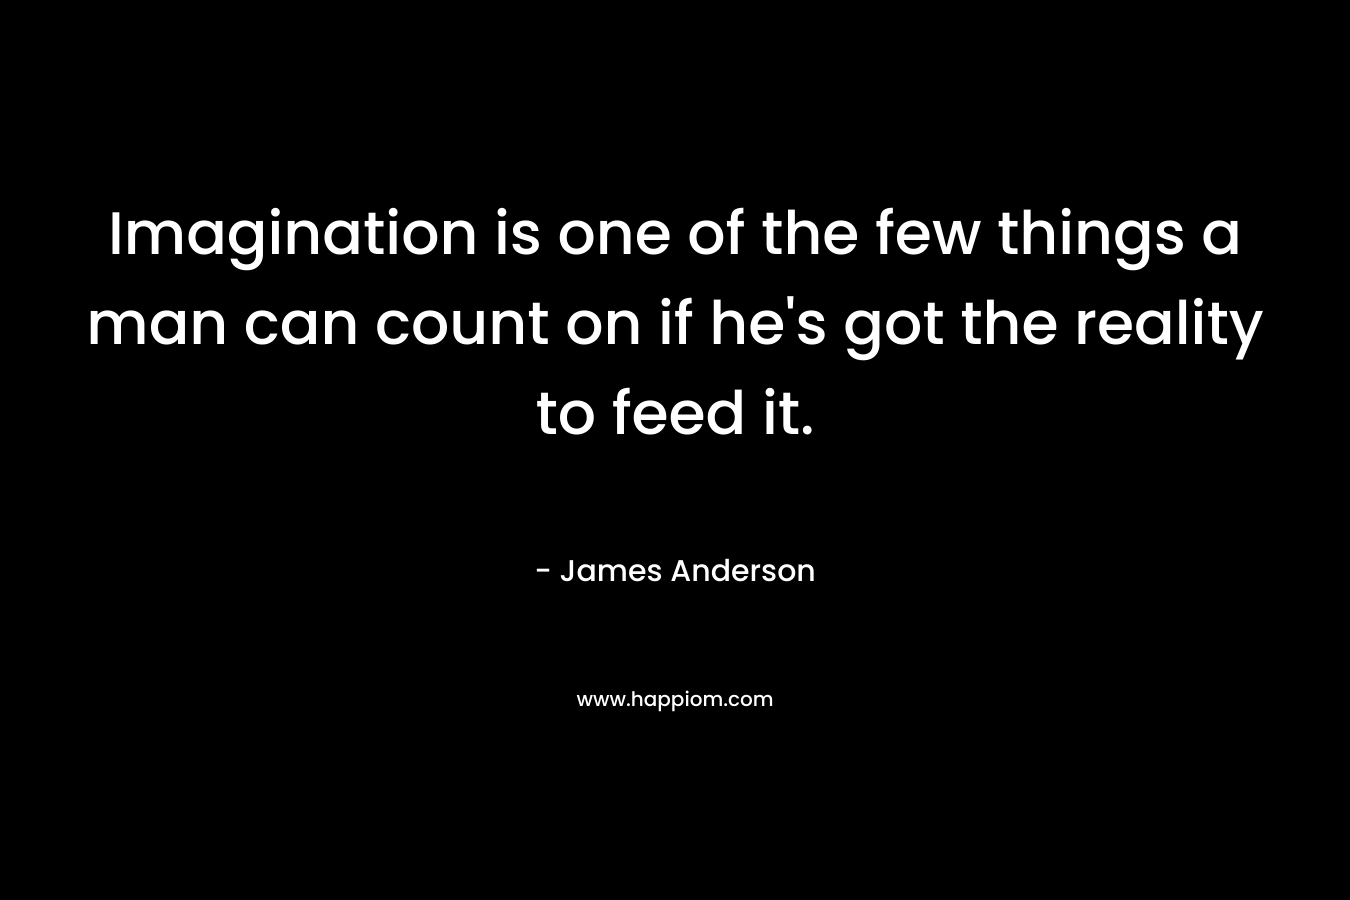 Imagination is one of the few things a man can count on if he’s got the reality to feed it. – James          Anderson